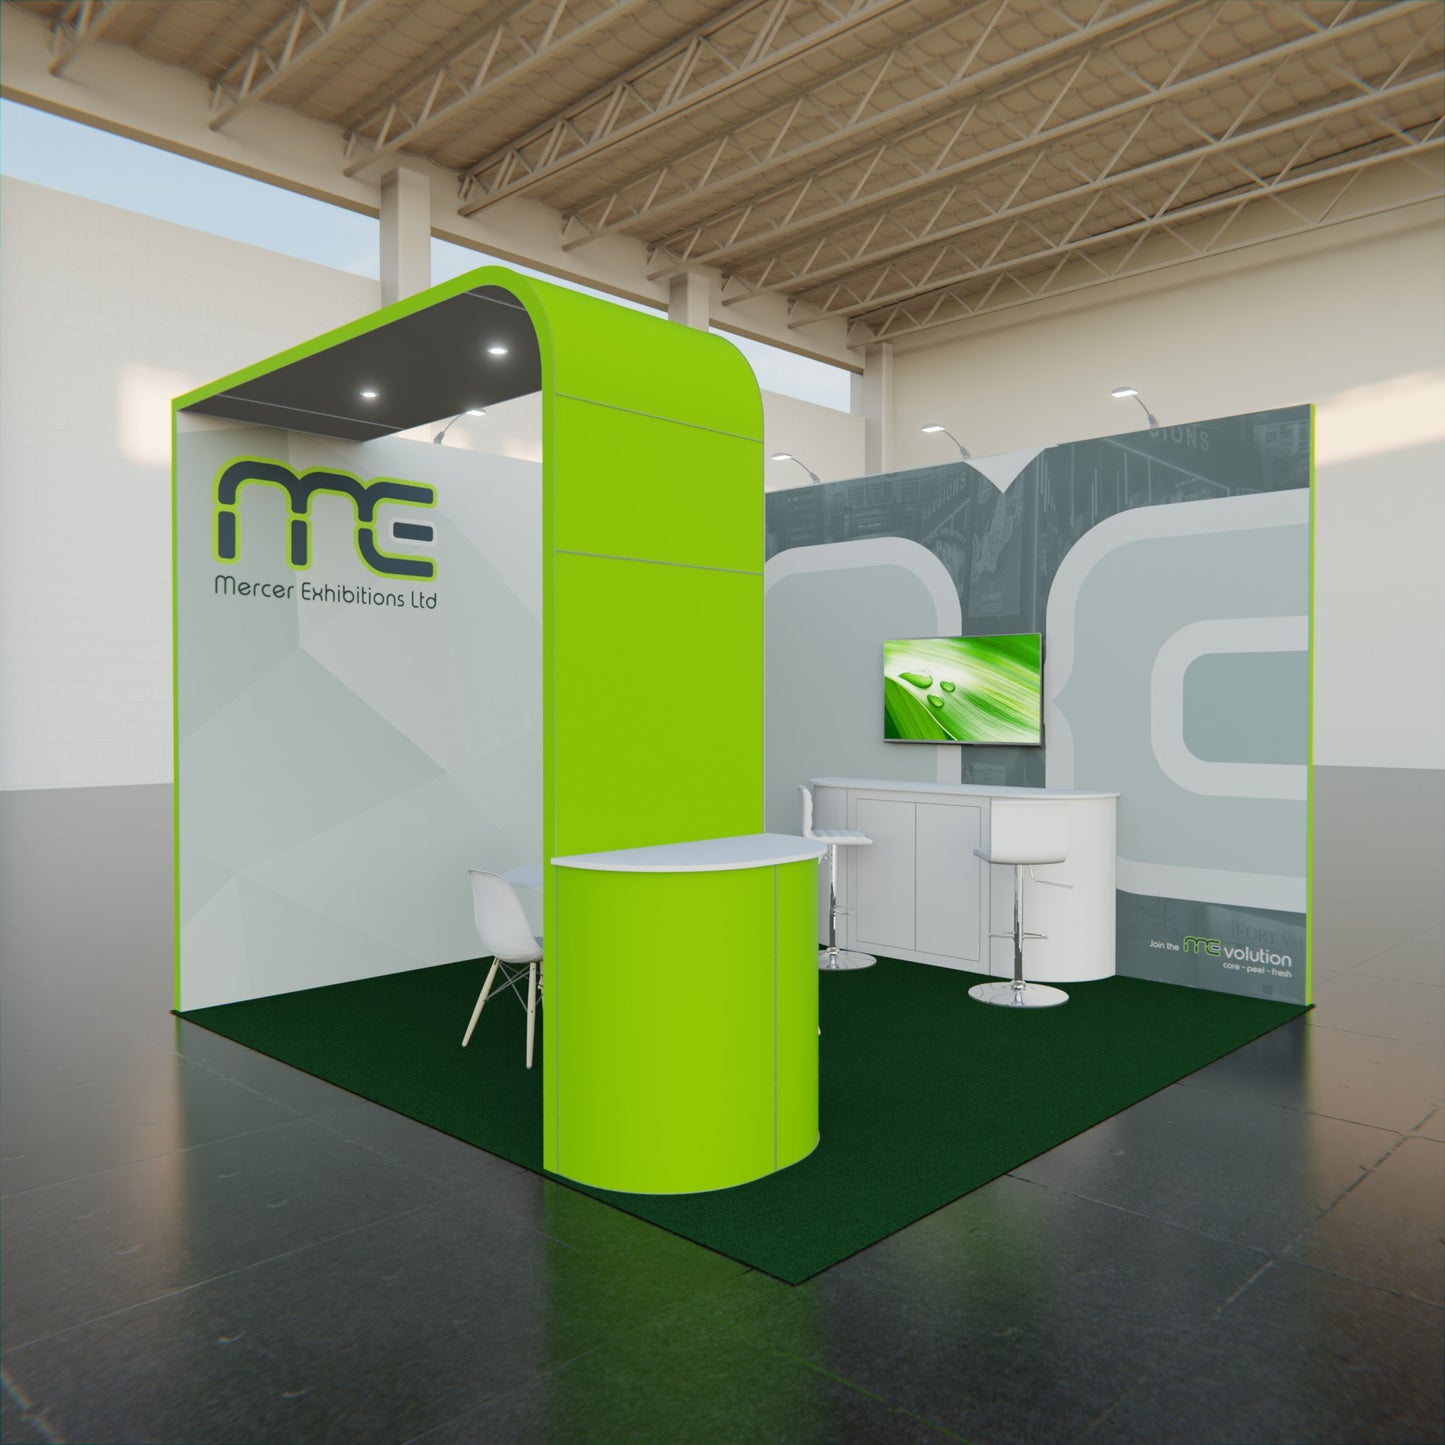 Four Meter x Four Meter "L" Shape Exhibition Stand, Two Open Sides